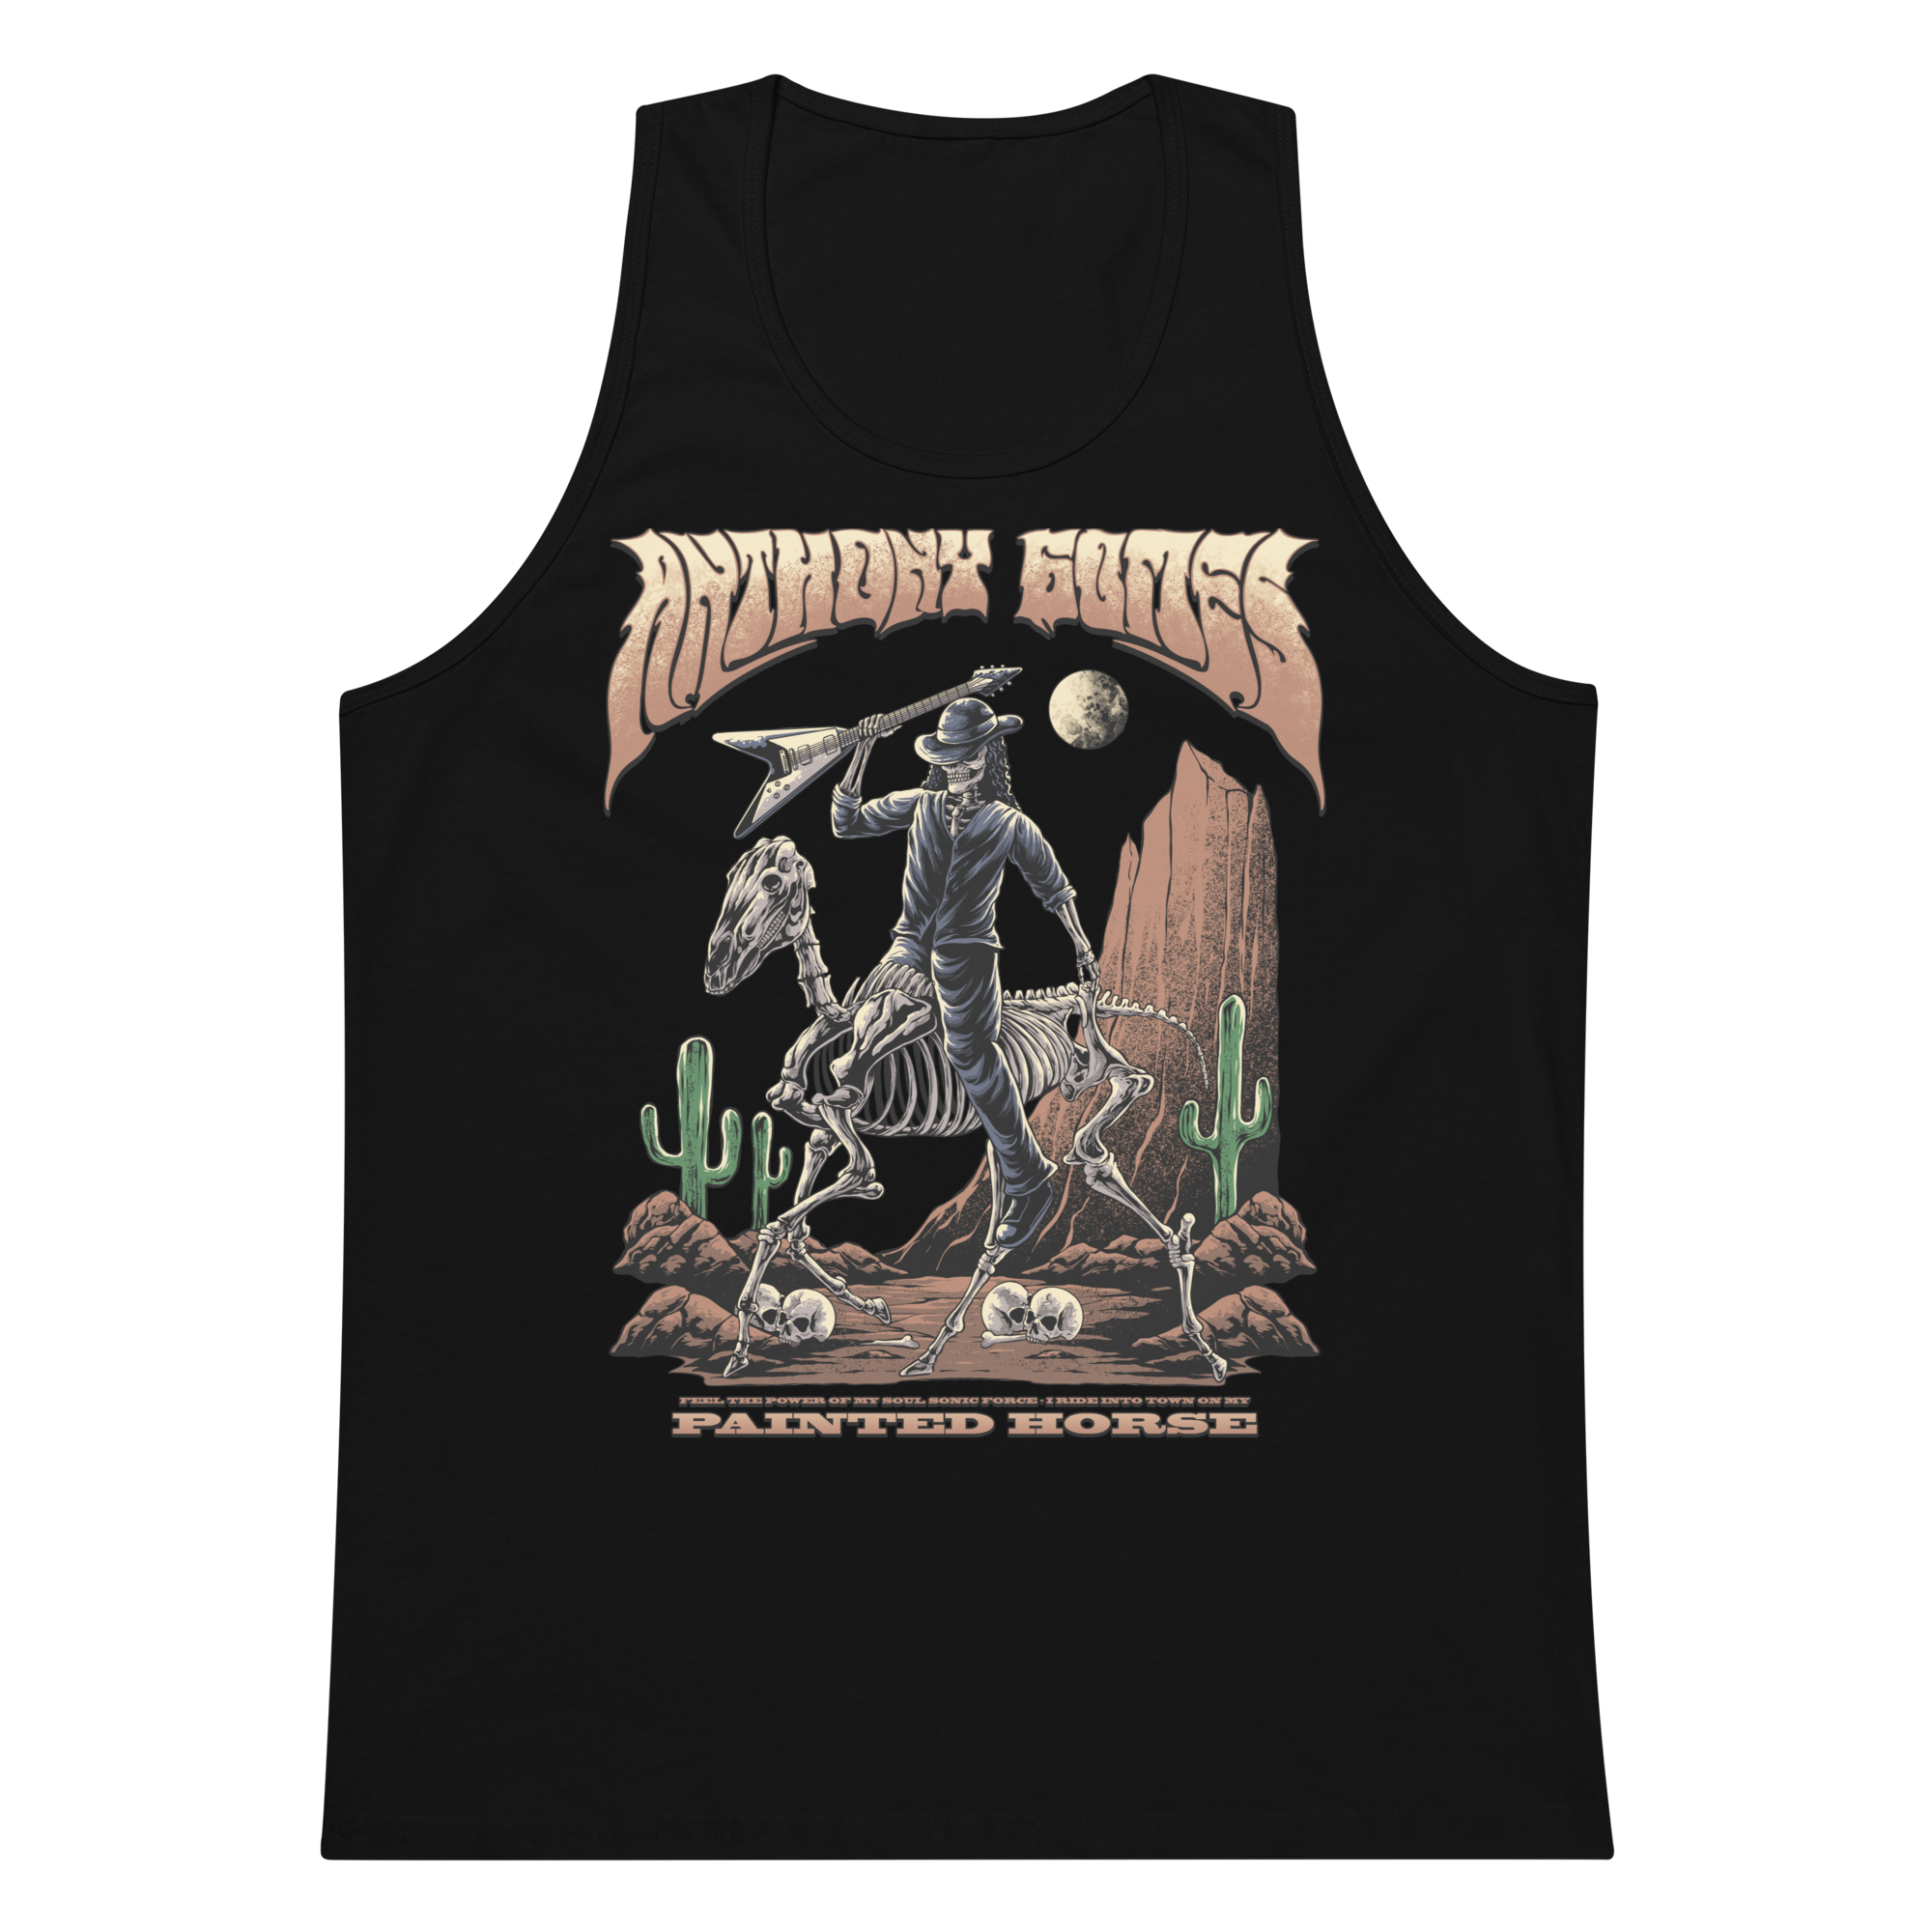 Men’s Painted Horse Tank Top - Available in 7 Colors (S-3XL)